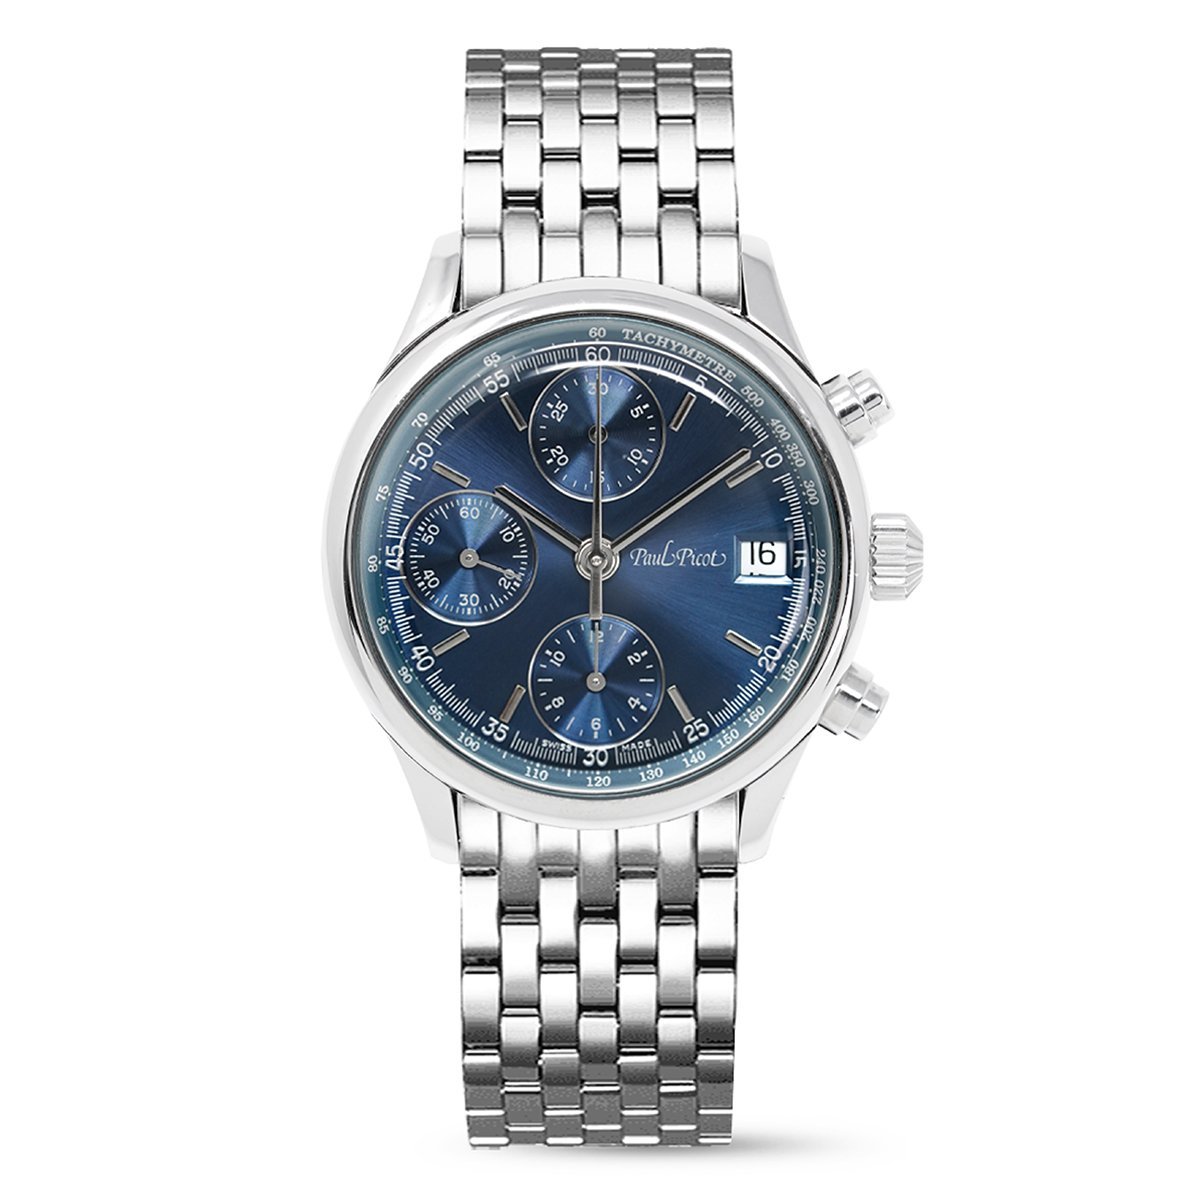 Paul Picot Men's Watch Telemark Chronograph Blue P4102.20.221/B - Watches & Crystals